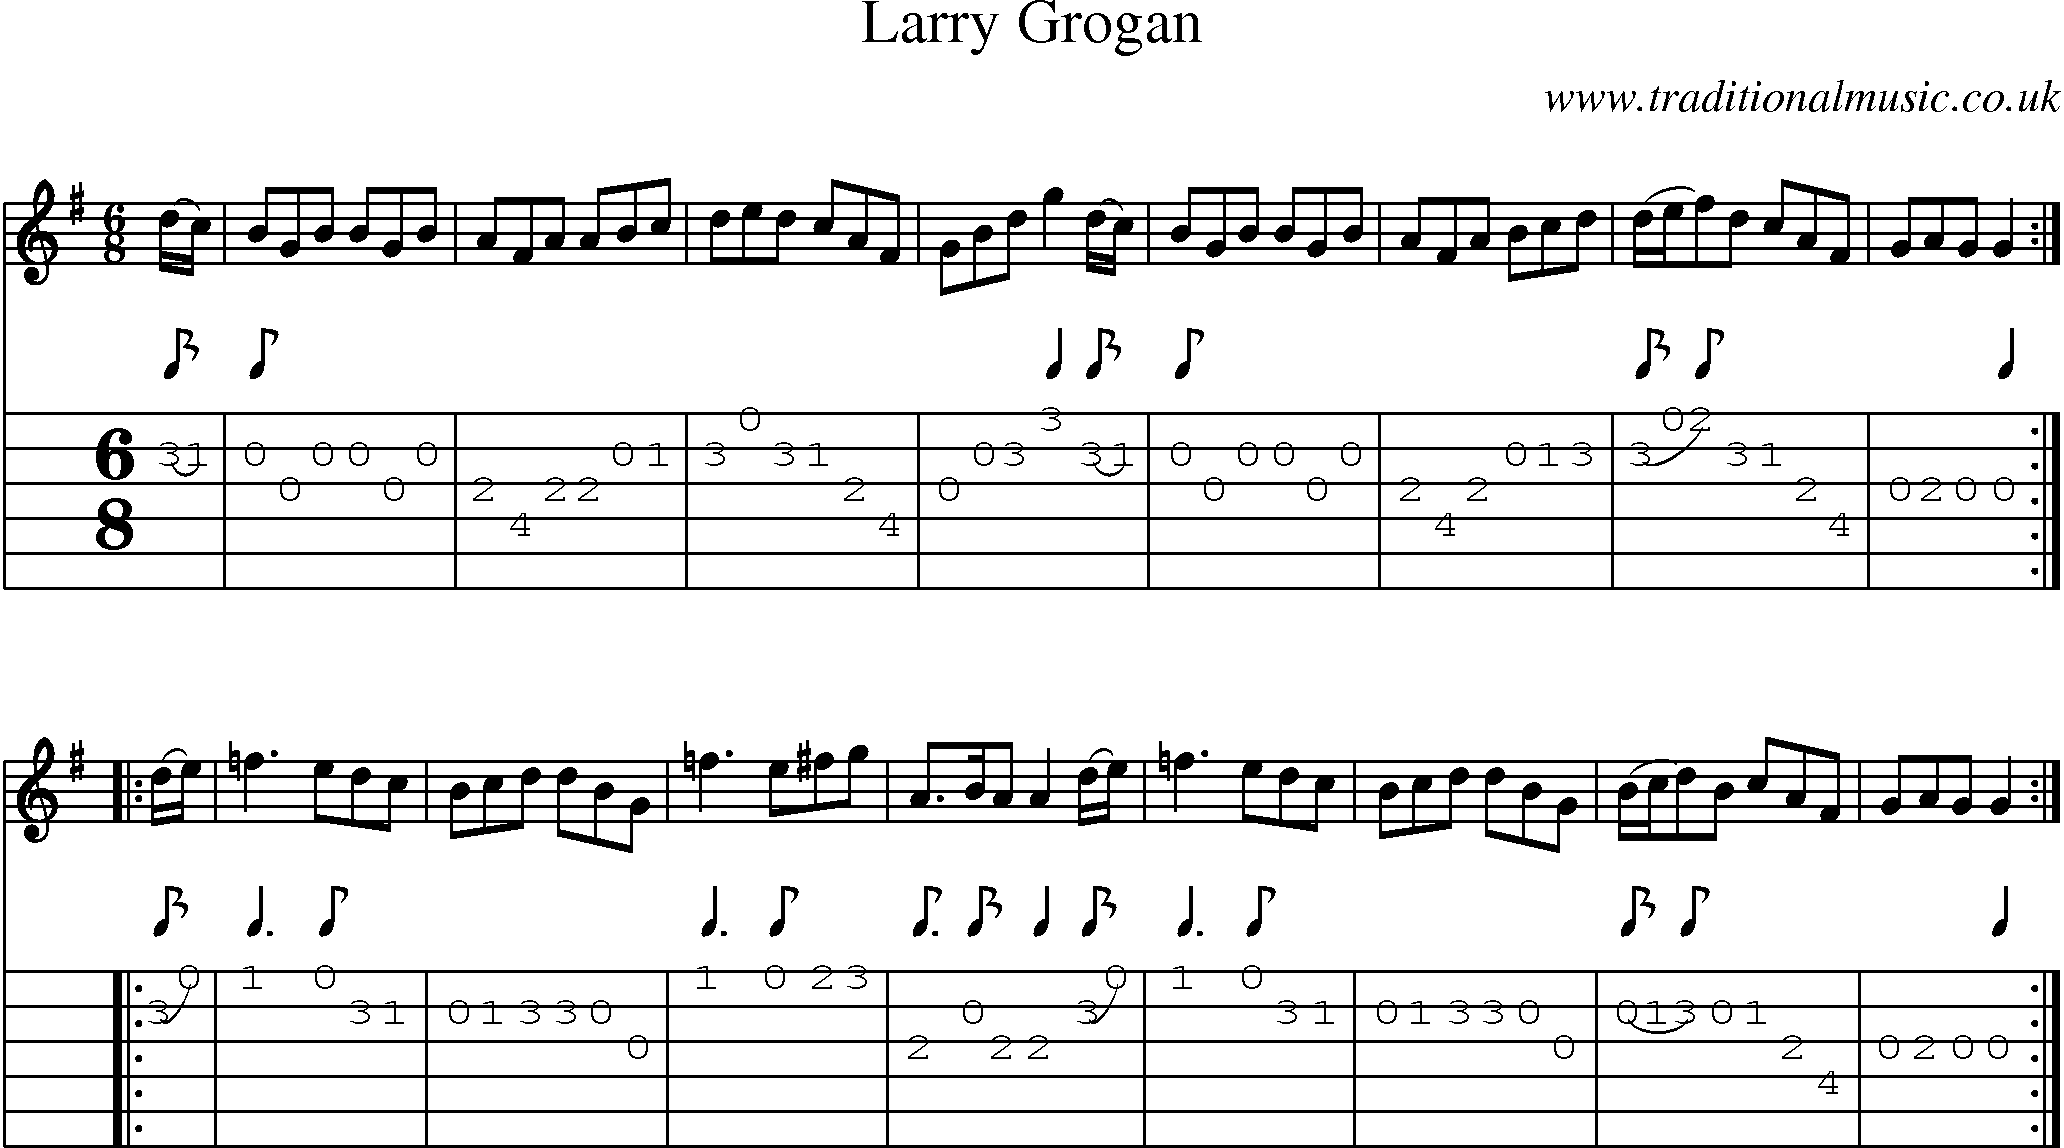 Music Score and Guitar Tabs for Larry Grogan